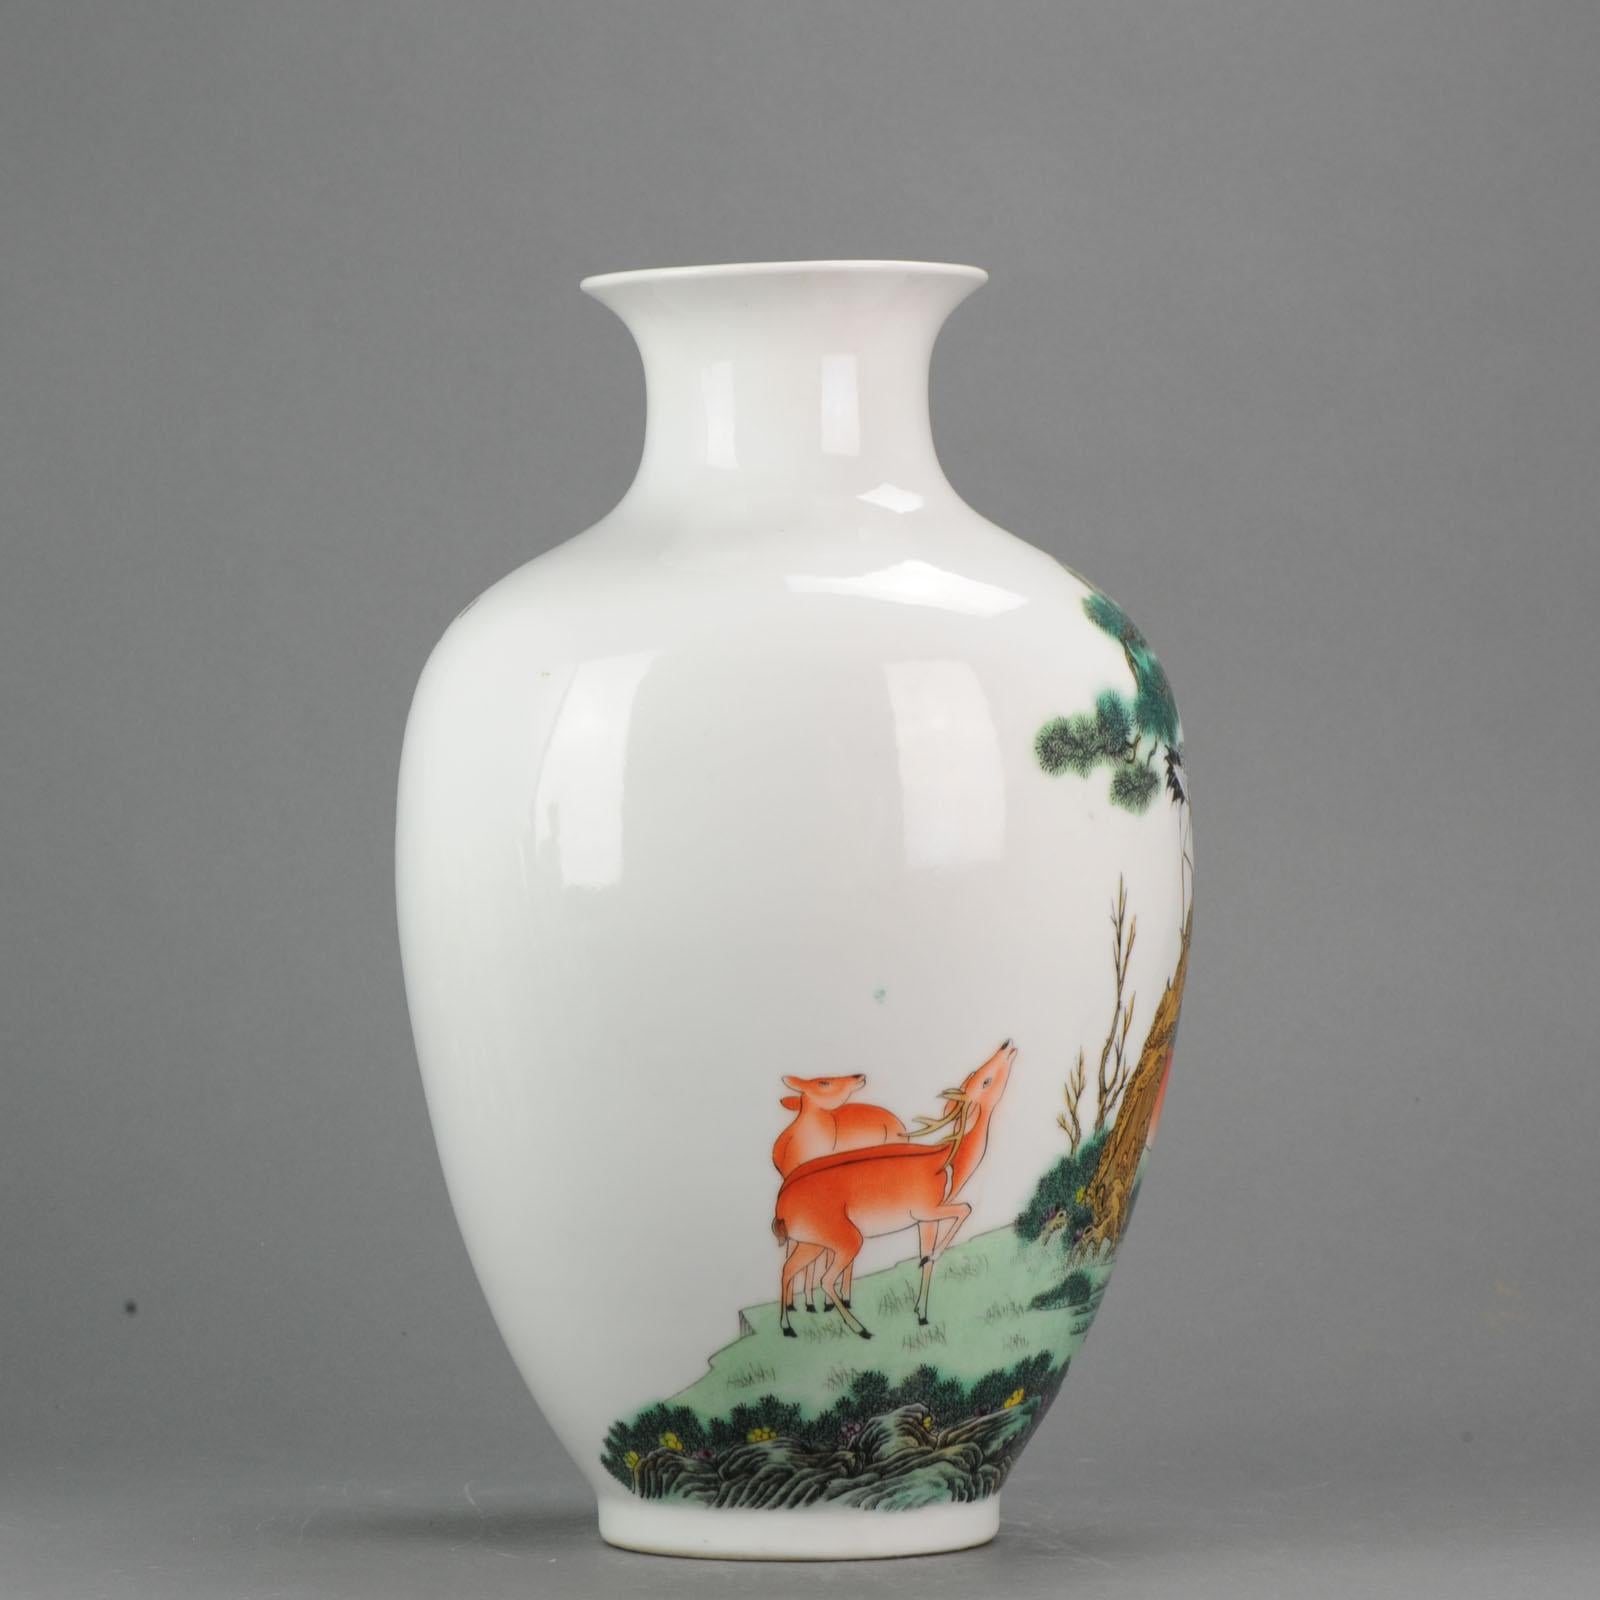 A very nicely decorated vase. The painting is very well done

Additional information:
Material: Porcelain & Pottery
Region of Origin: China
Period: 20th century PRoC (1949 - now)
Age: Pre-1800
Condition: Overall Condition Perfect
Dimension: 39.5 H cm